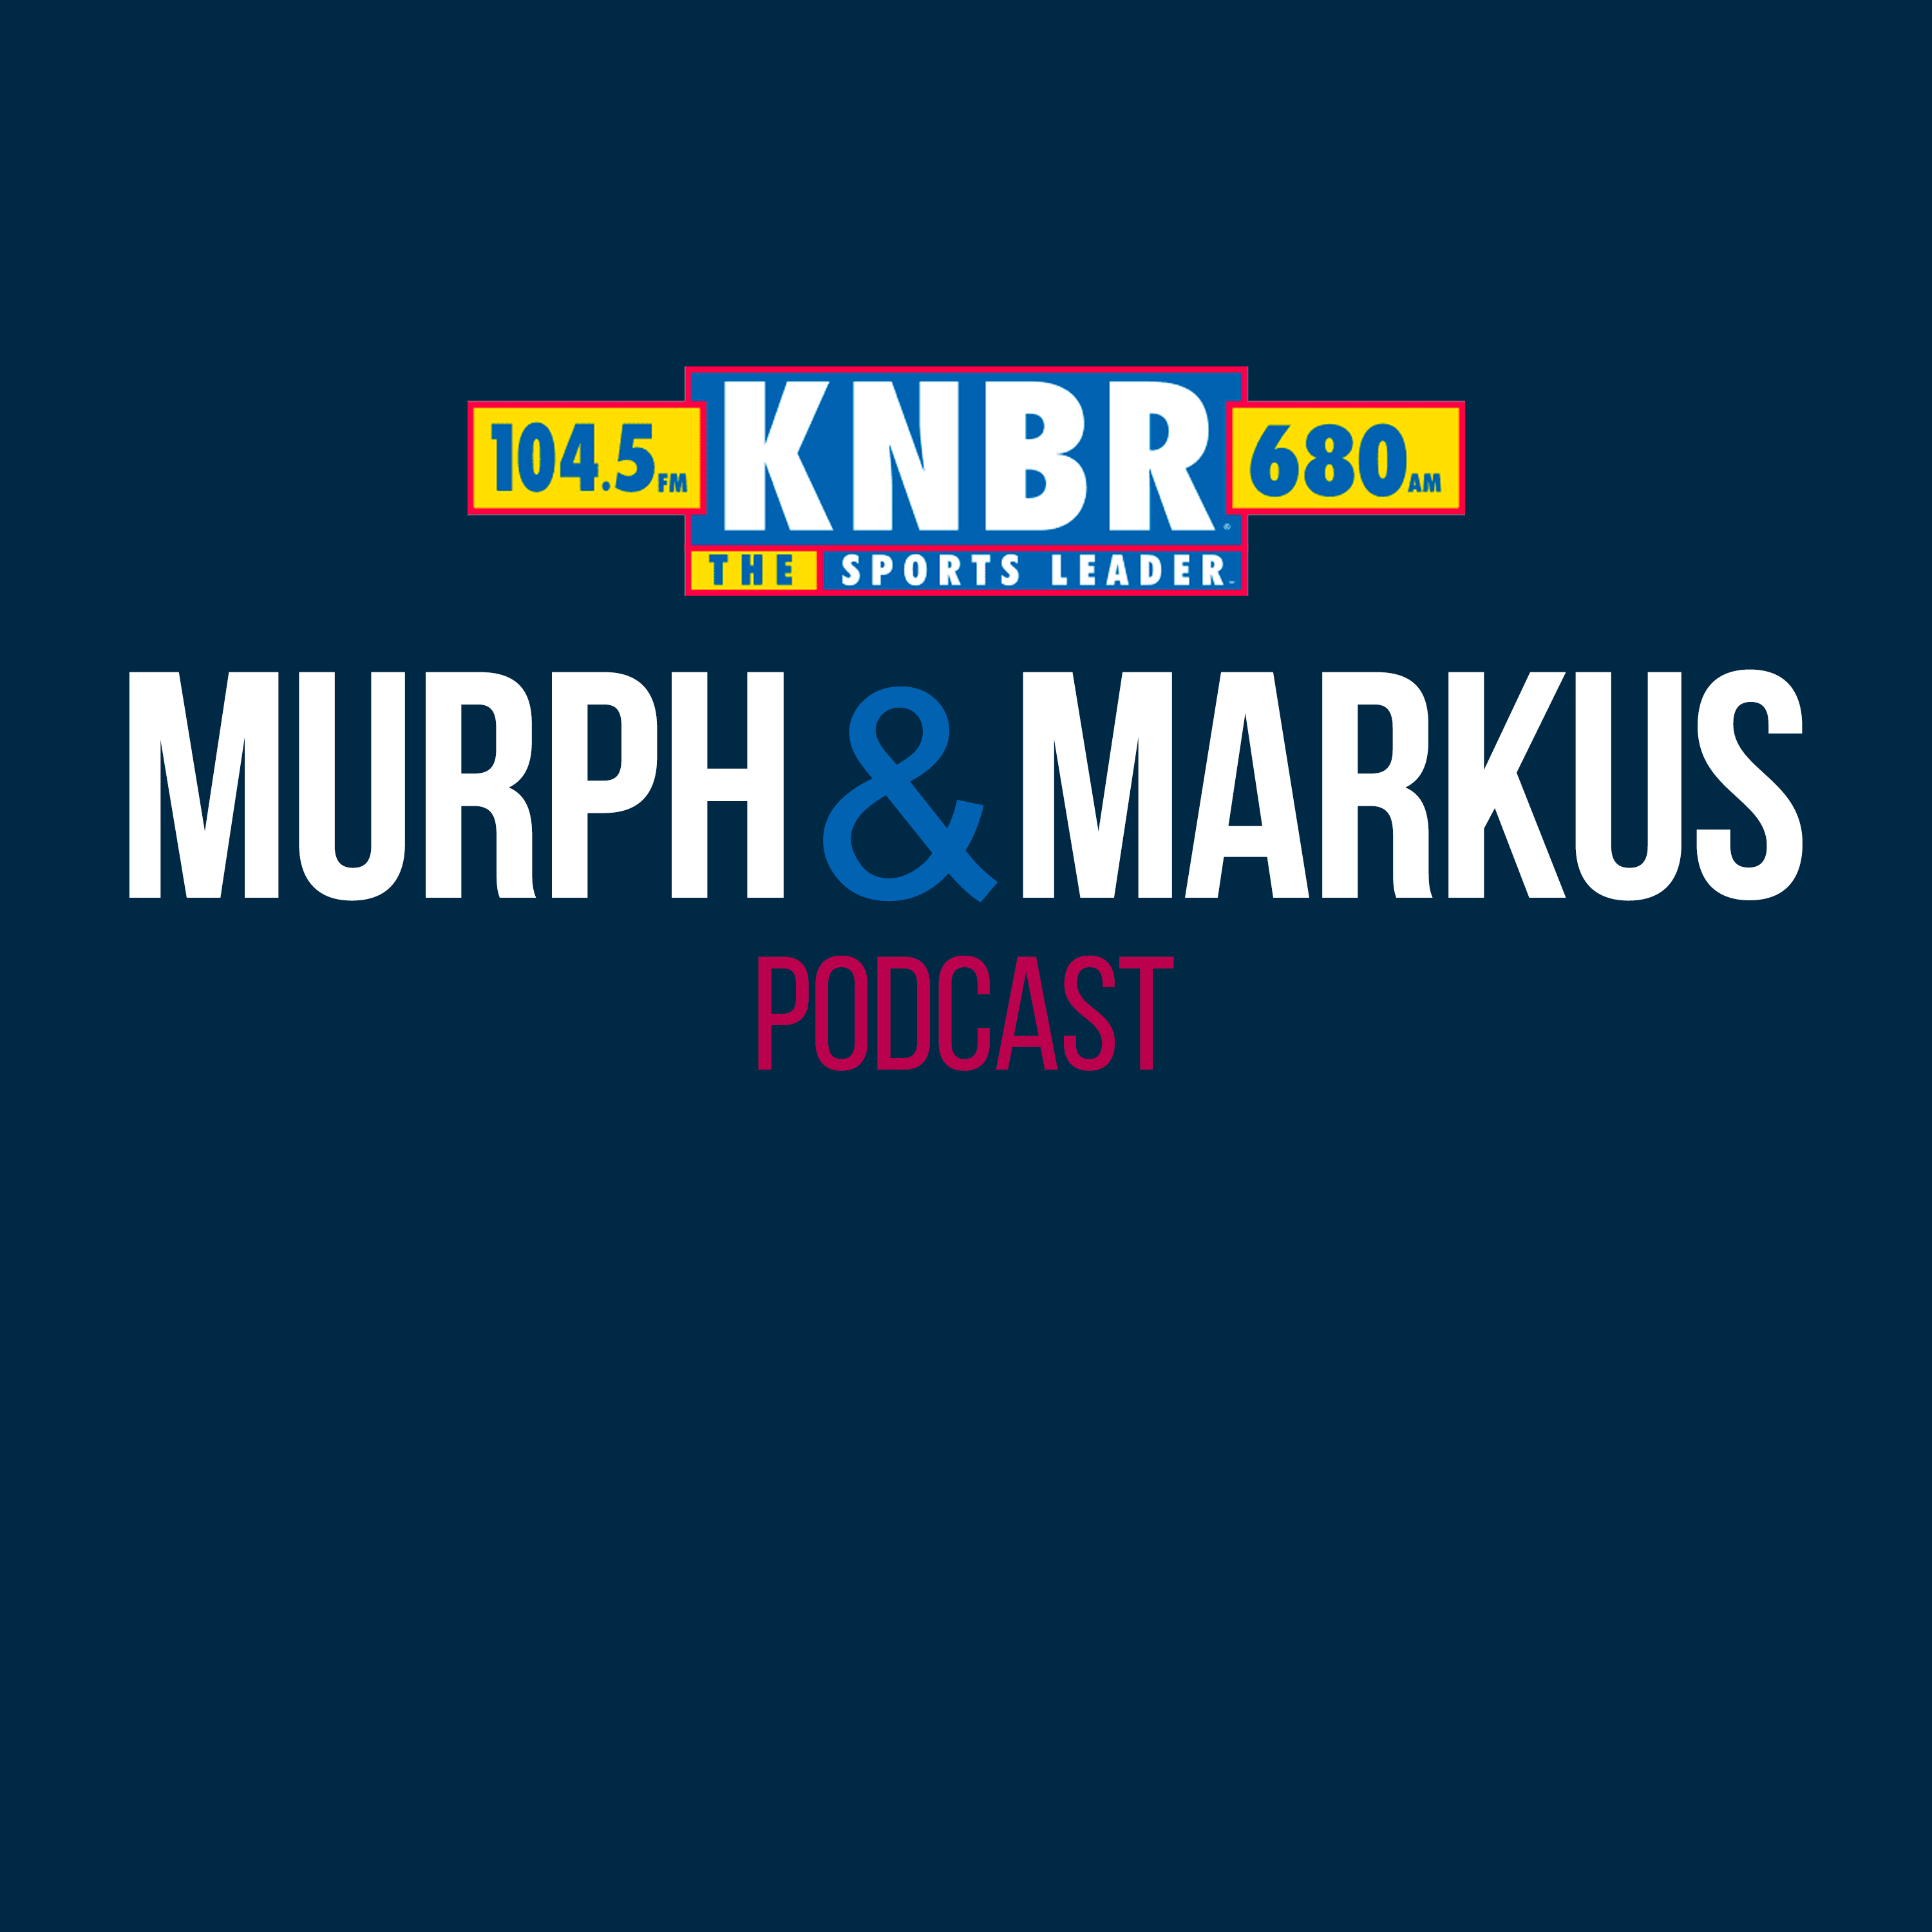 7/17 49ers reporter, David Lombardi joined Murph and Markus to discuss the Brandon Aiyuk trade demand along with which rookie to keep an eye on during training camp